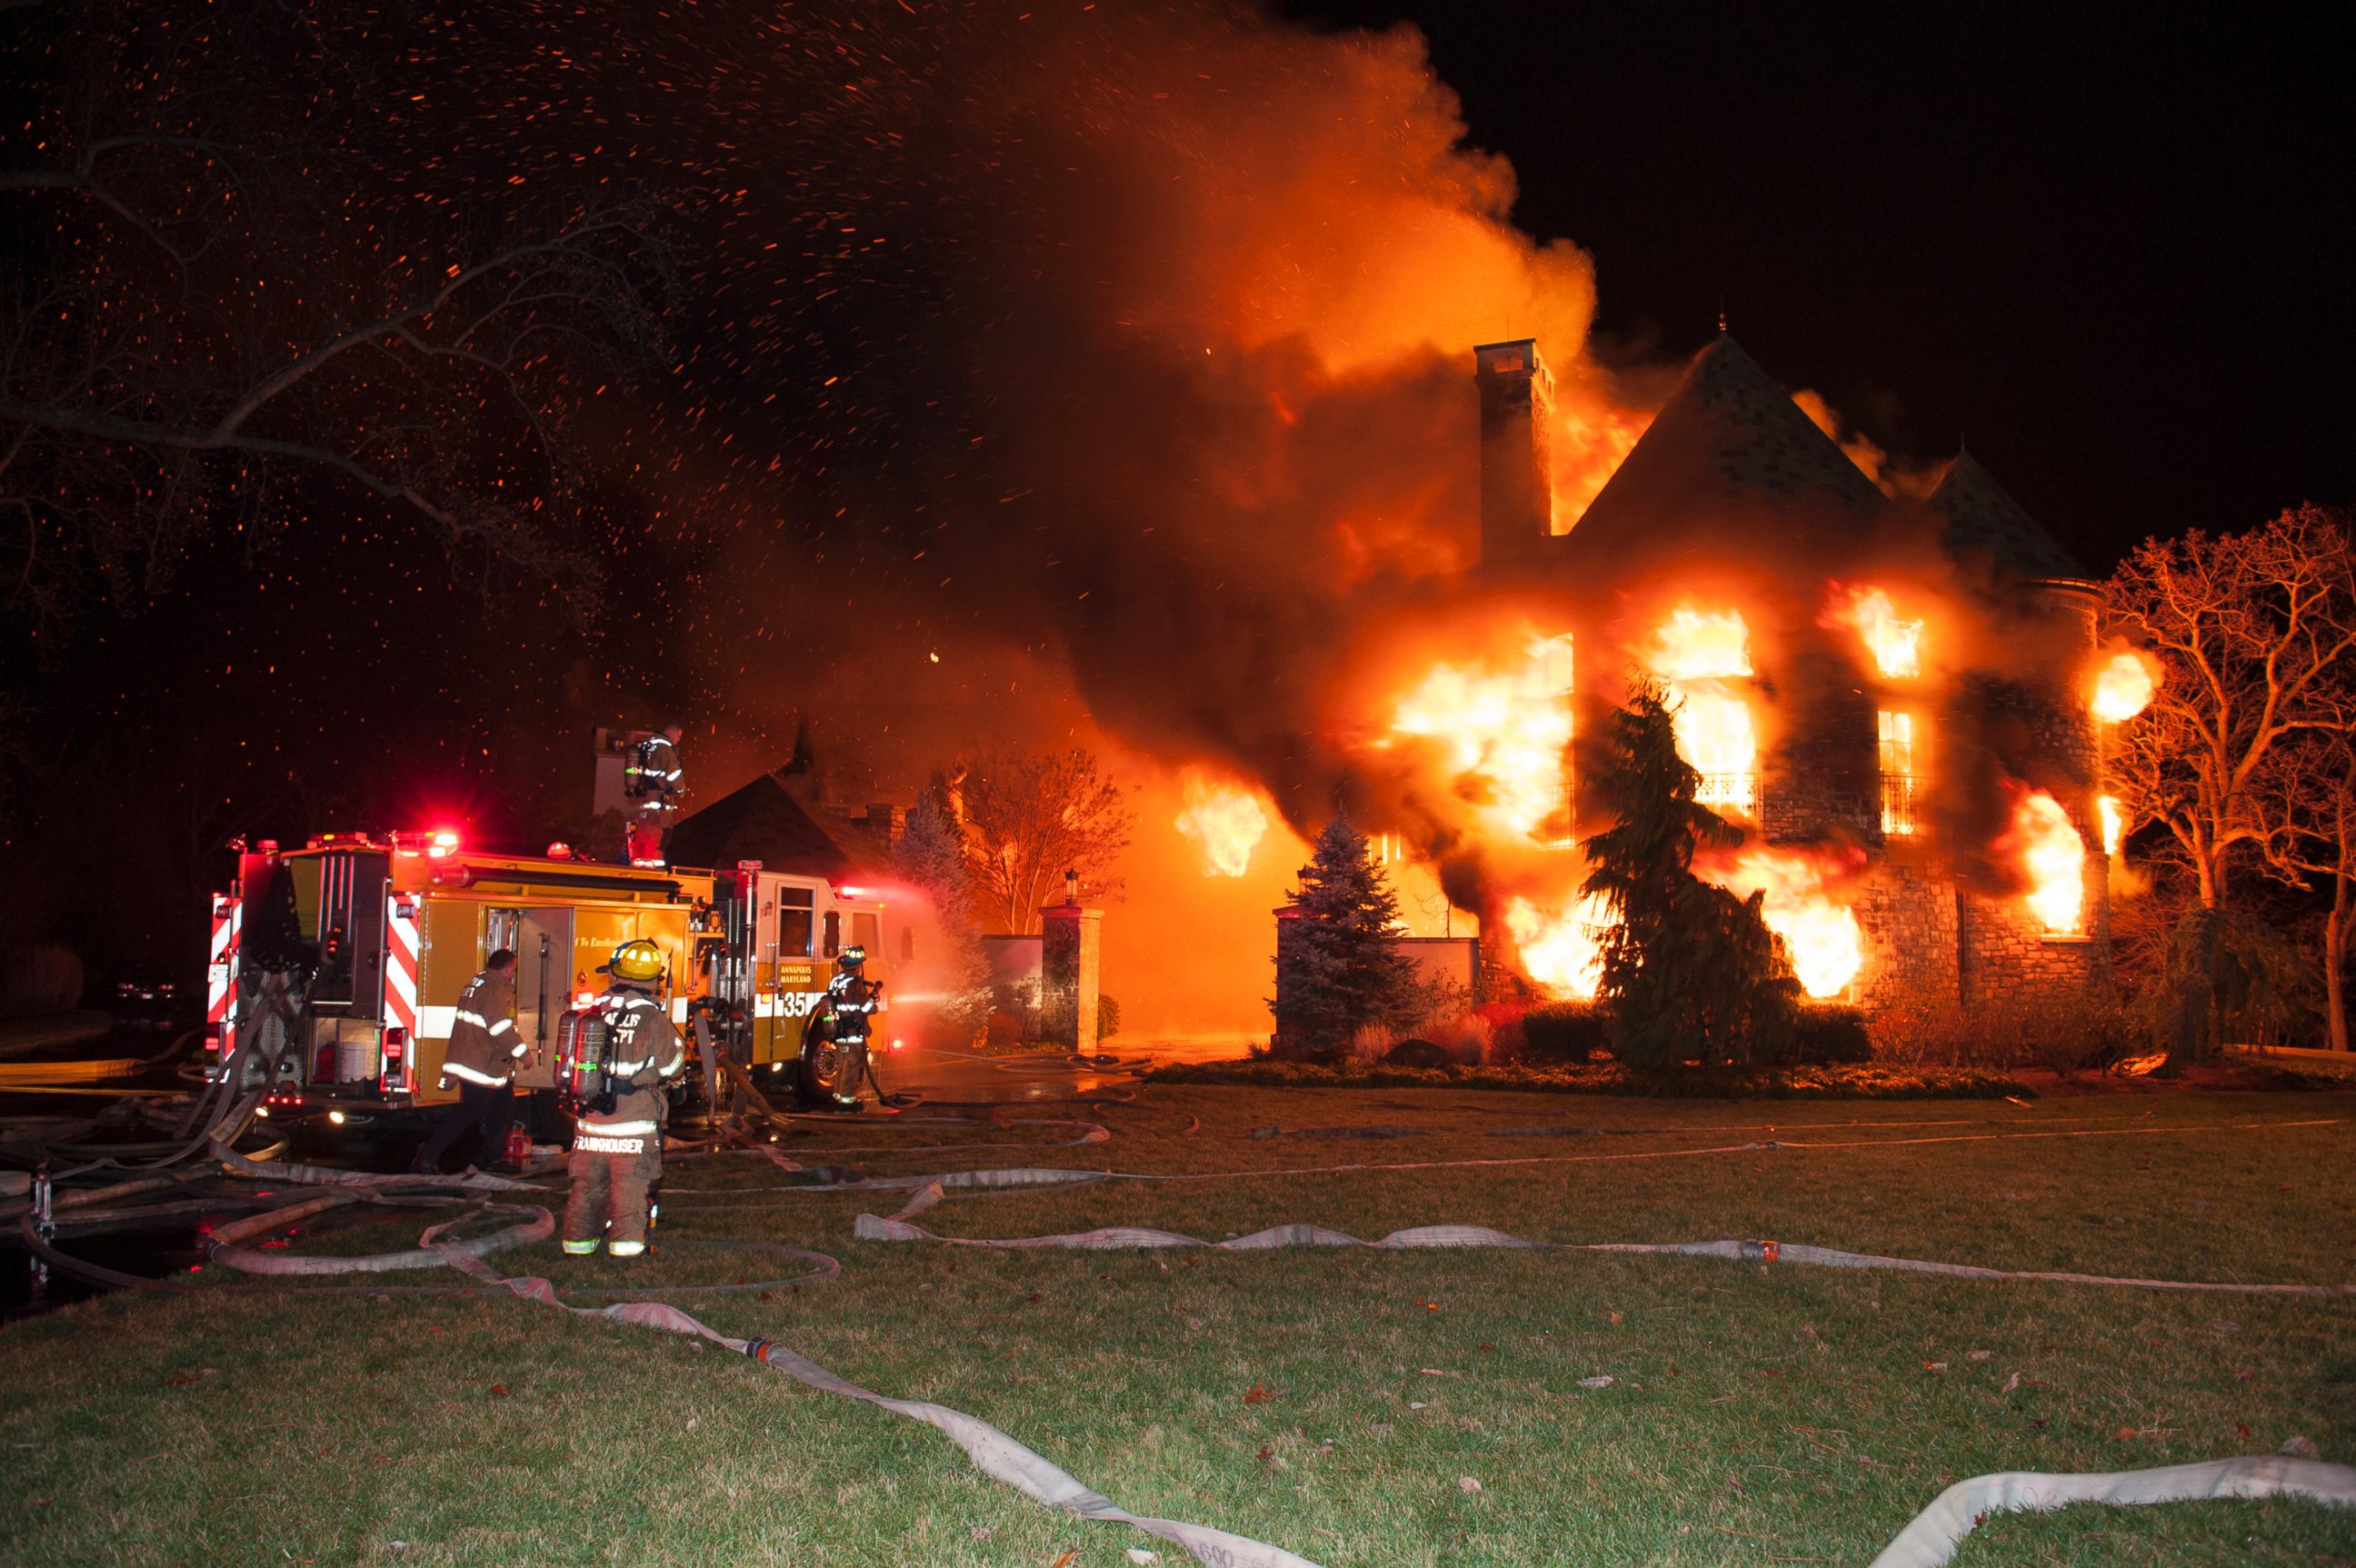 PHOTO: Firefighters battle a four-alarm fire at a home on Childs Point Road, Jan. 19, 2015, in Annapolis, Md.